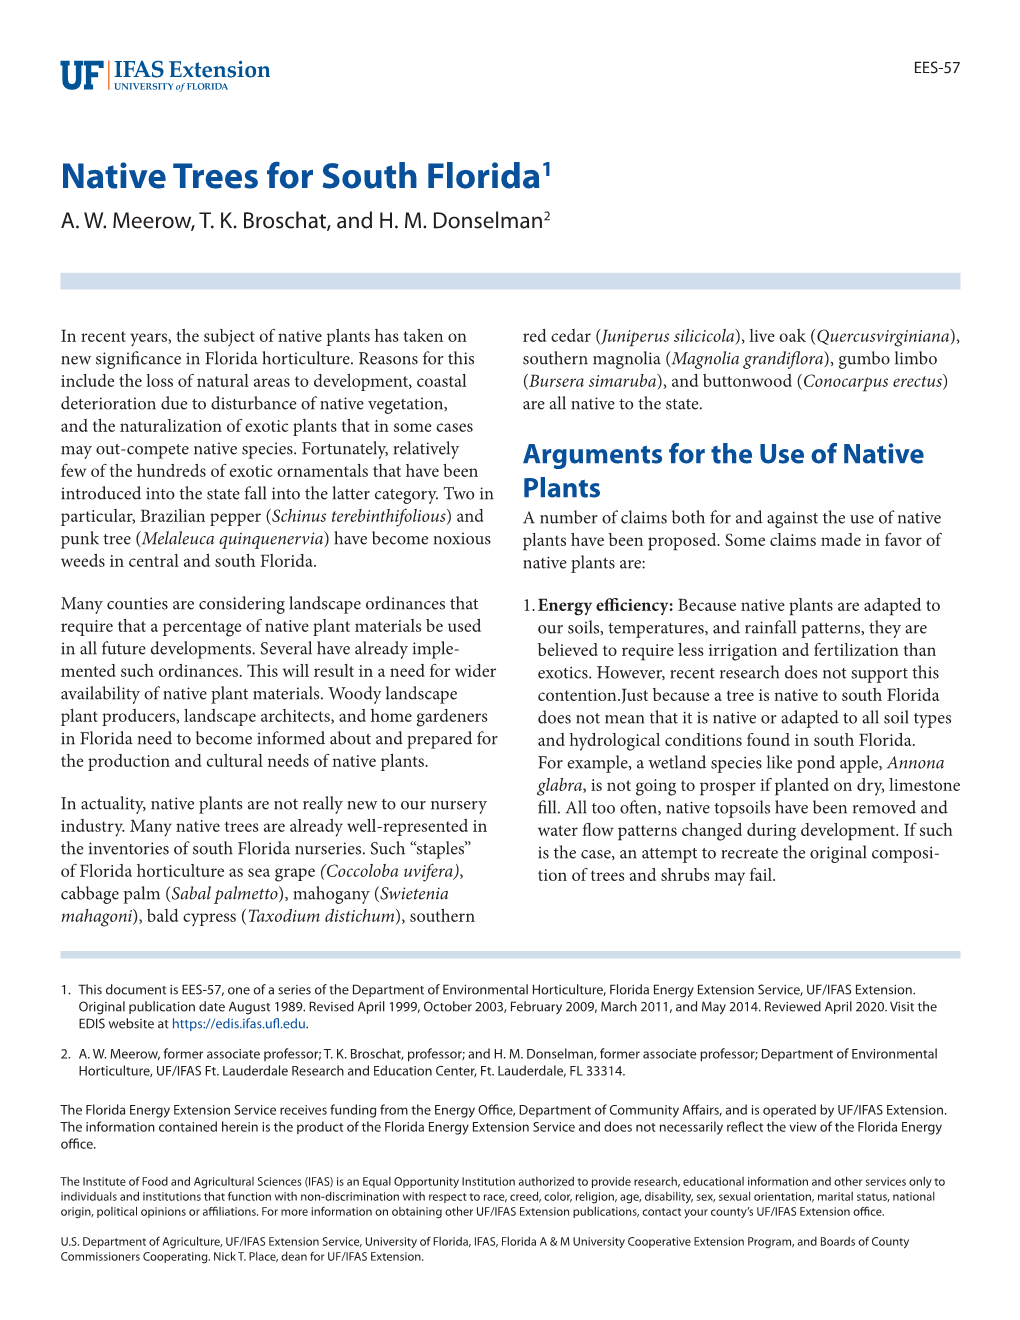 Native Trees for South Florida1 A